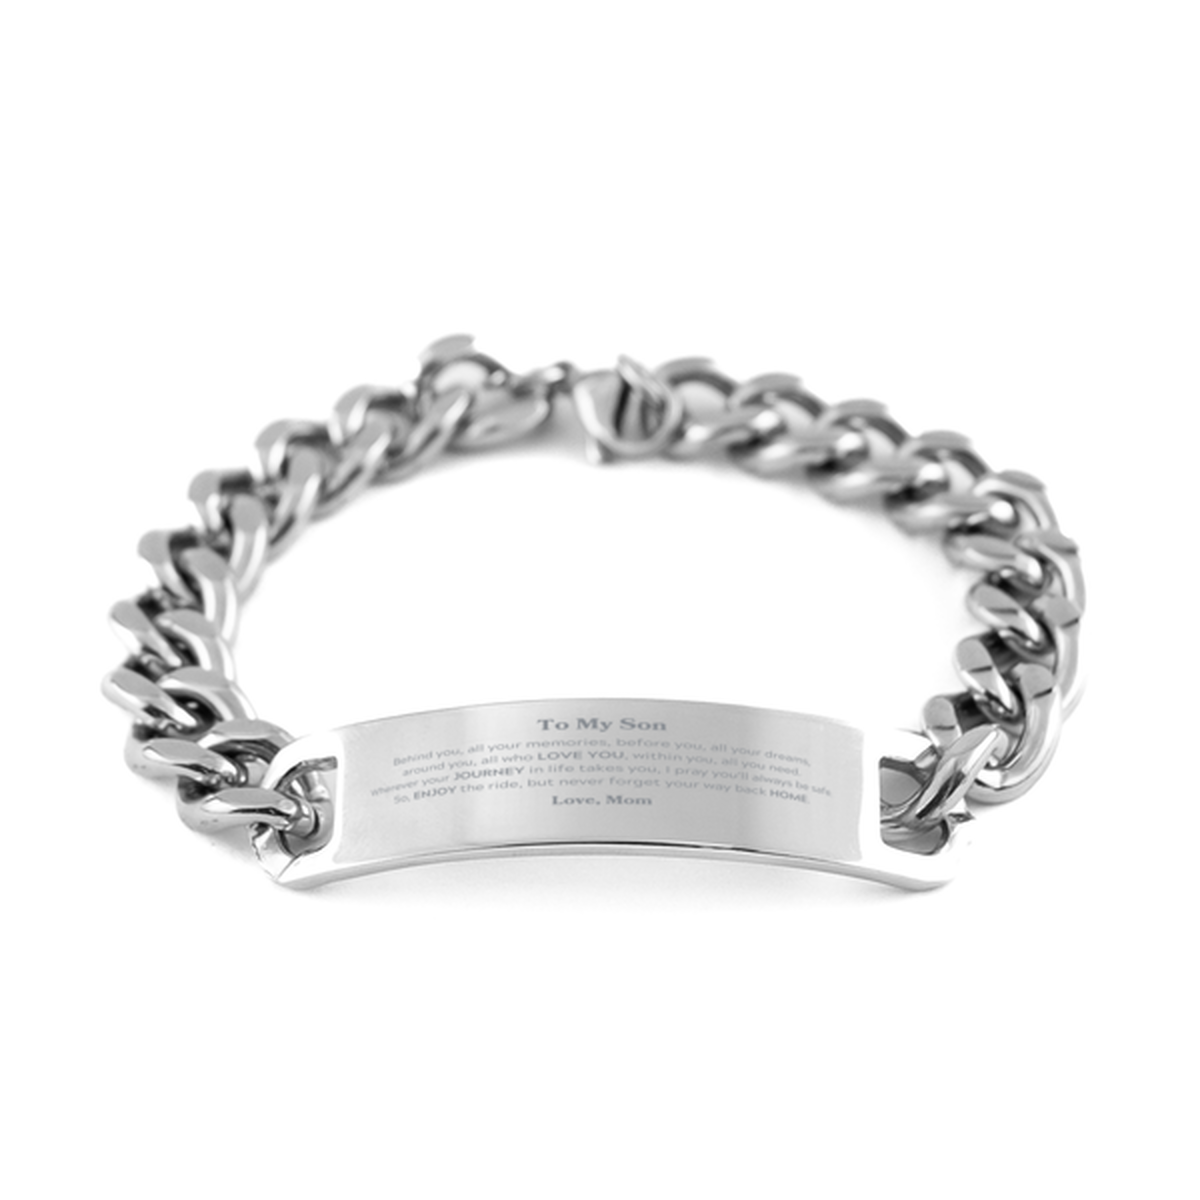 To My Son Graduation Gifts from Mom, Son Cuban Chain Stainless Steel Bracelet Christmas Birthday Gifts for Son Behind you, all your memories, before you, all your dreams. Love, Mom